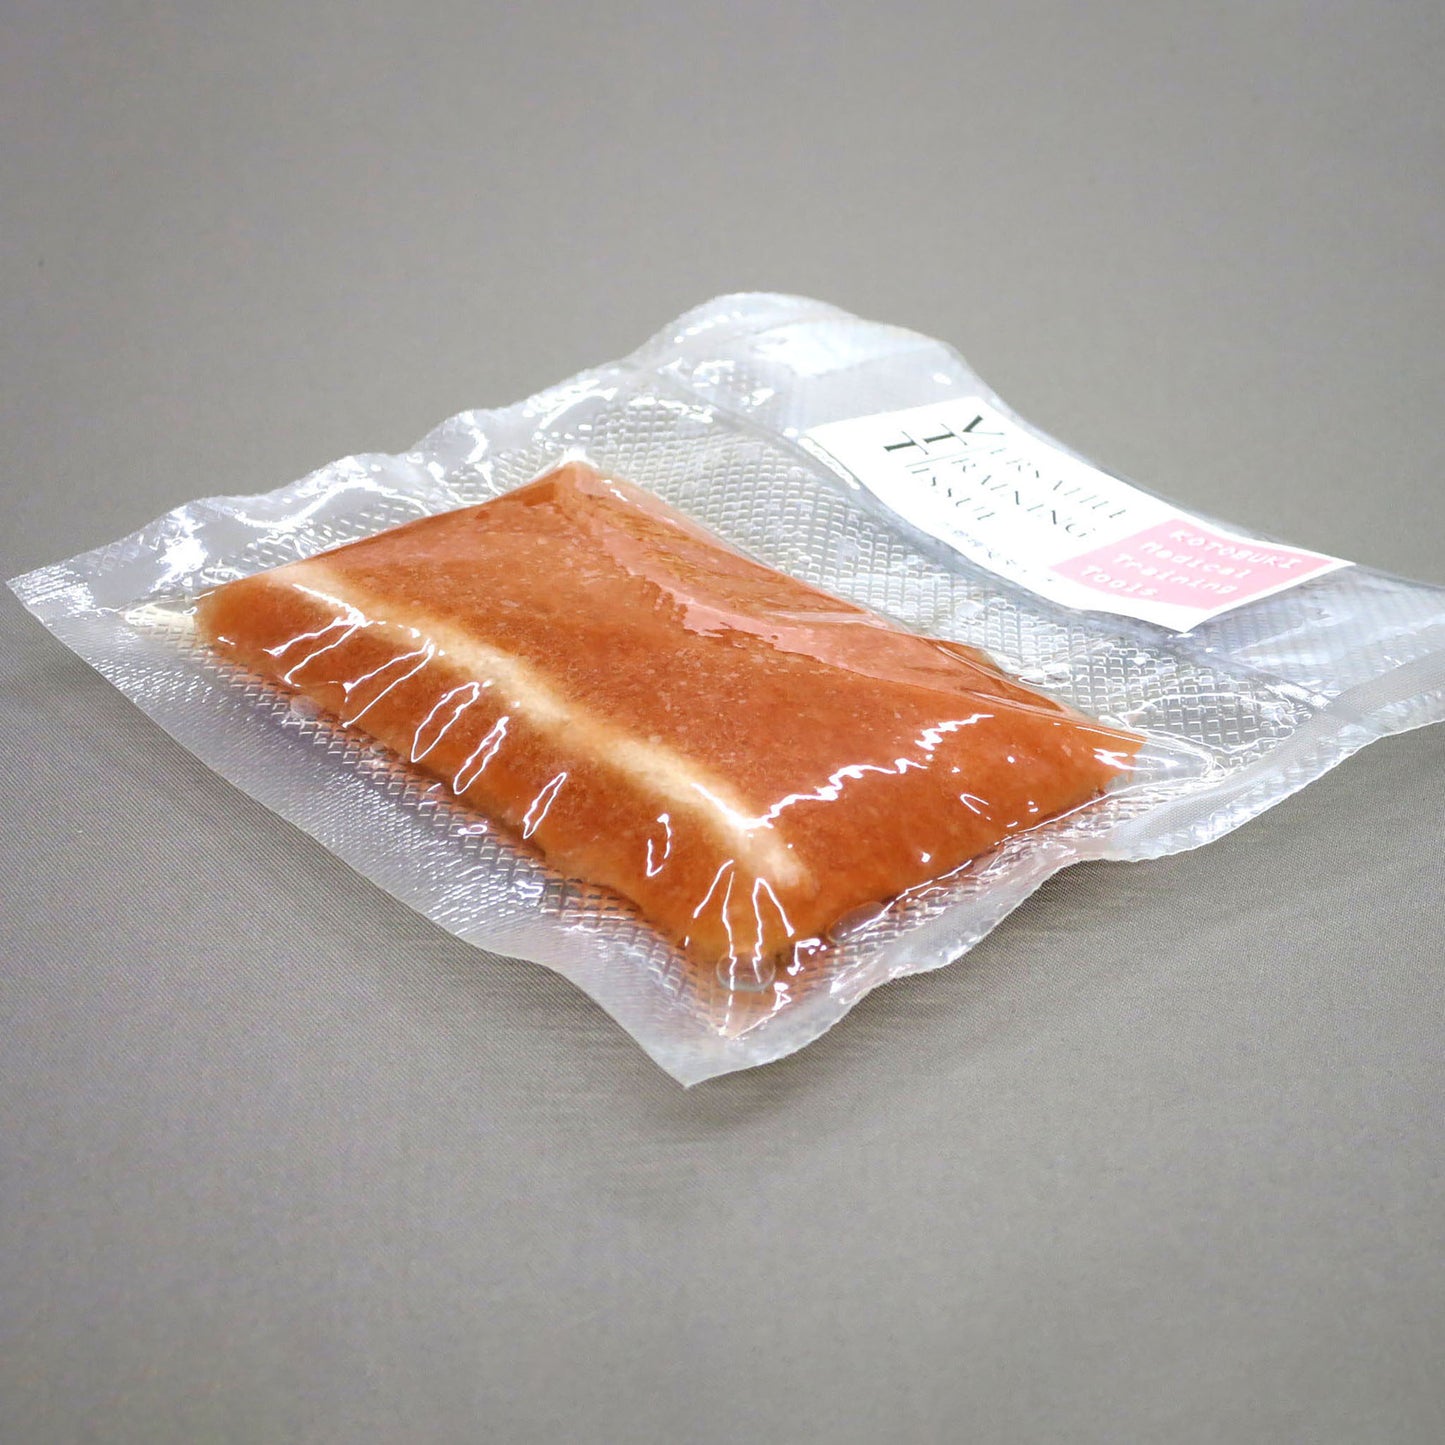 The VTT Vessel Dissection Model in its shrink-wrapped packaging against a gray background. When packaged, it is only about 1.5 centimeters thick. 